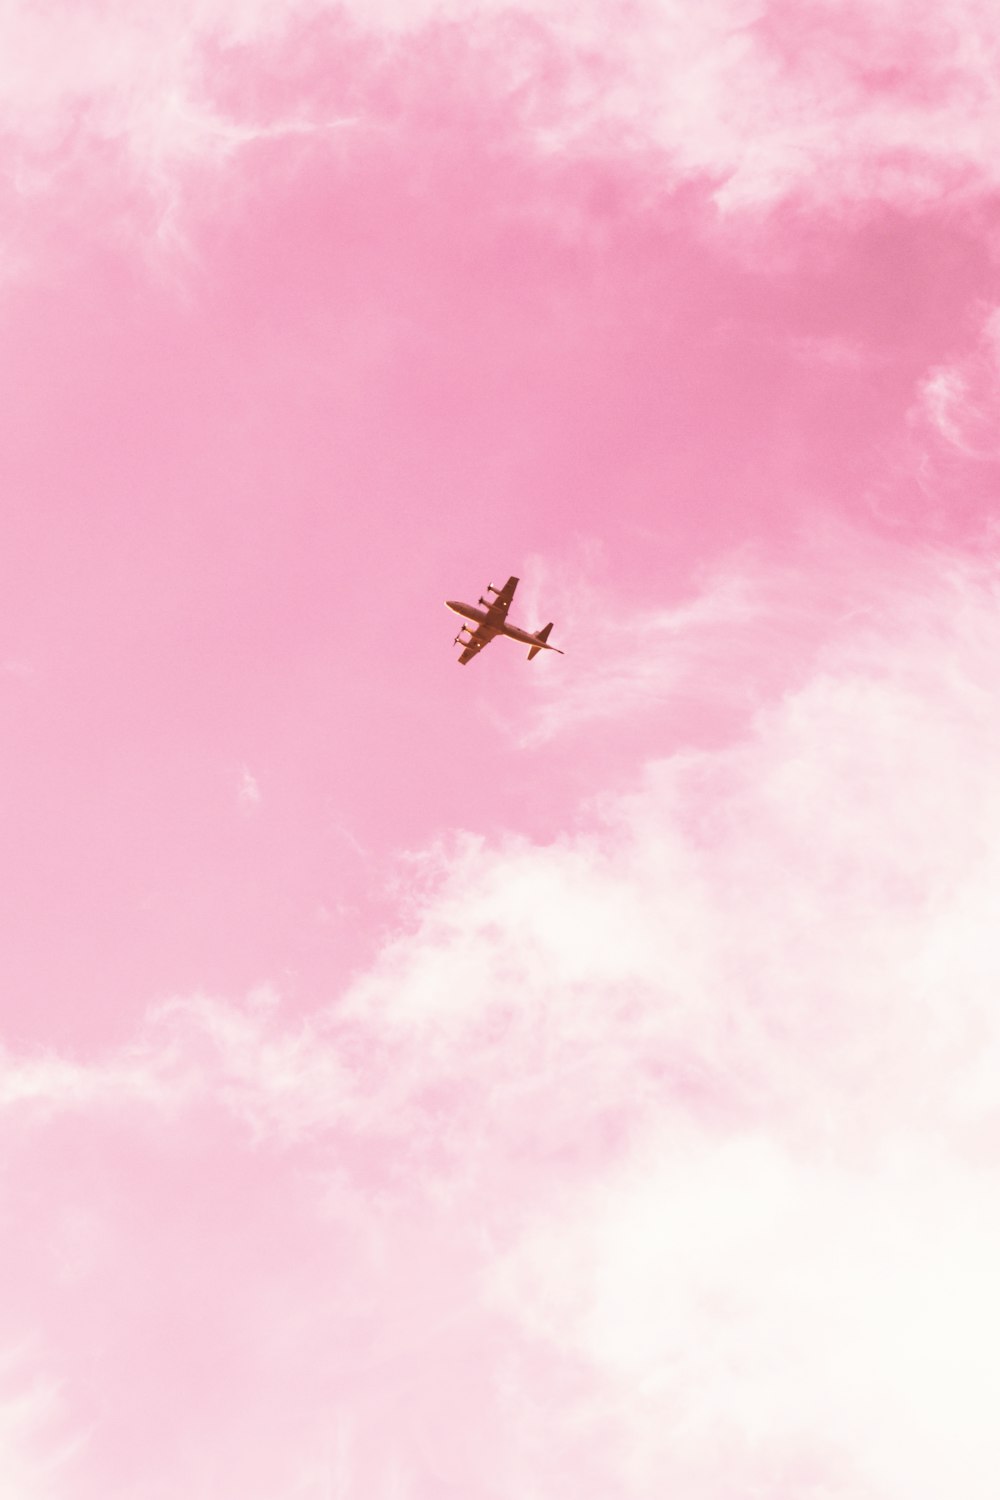 550 Pink Aesthetic Pictures Download Free Images On Unsplash